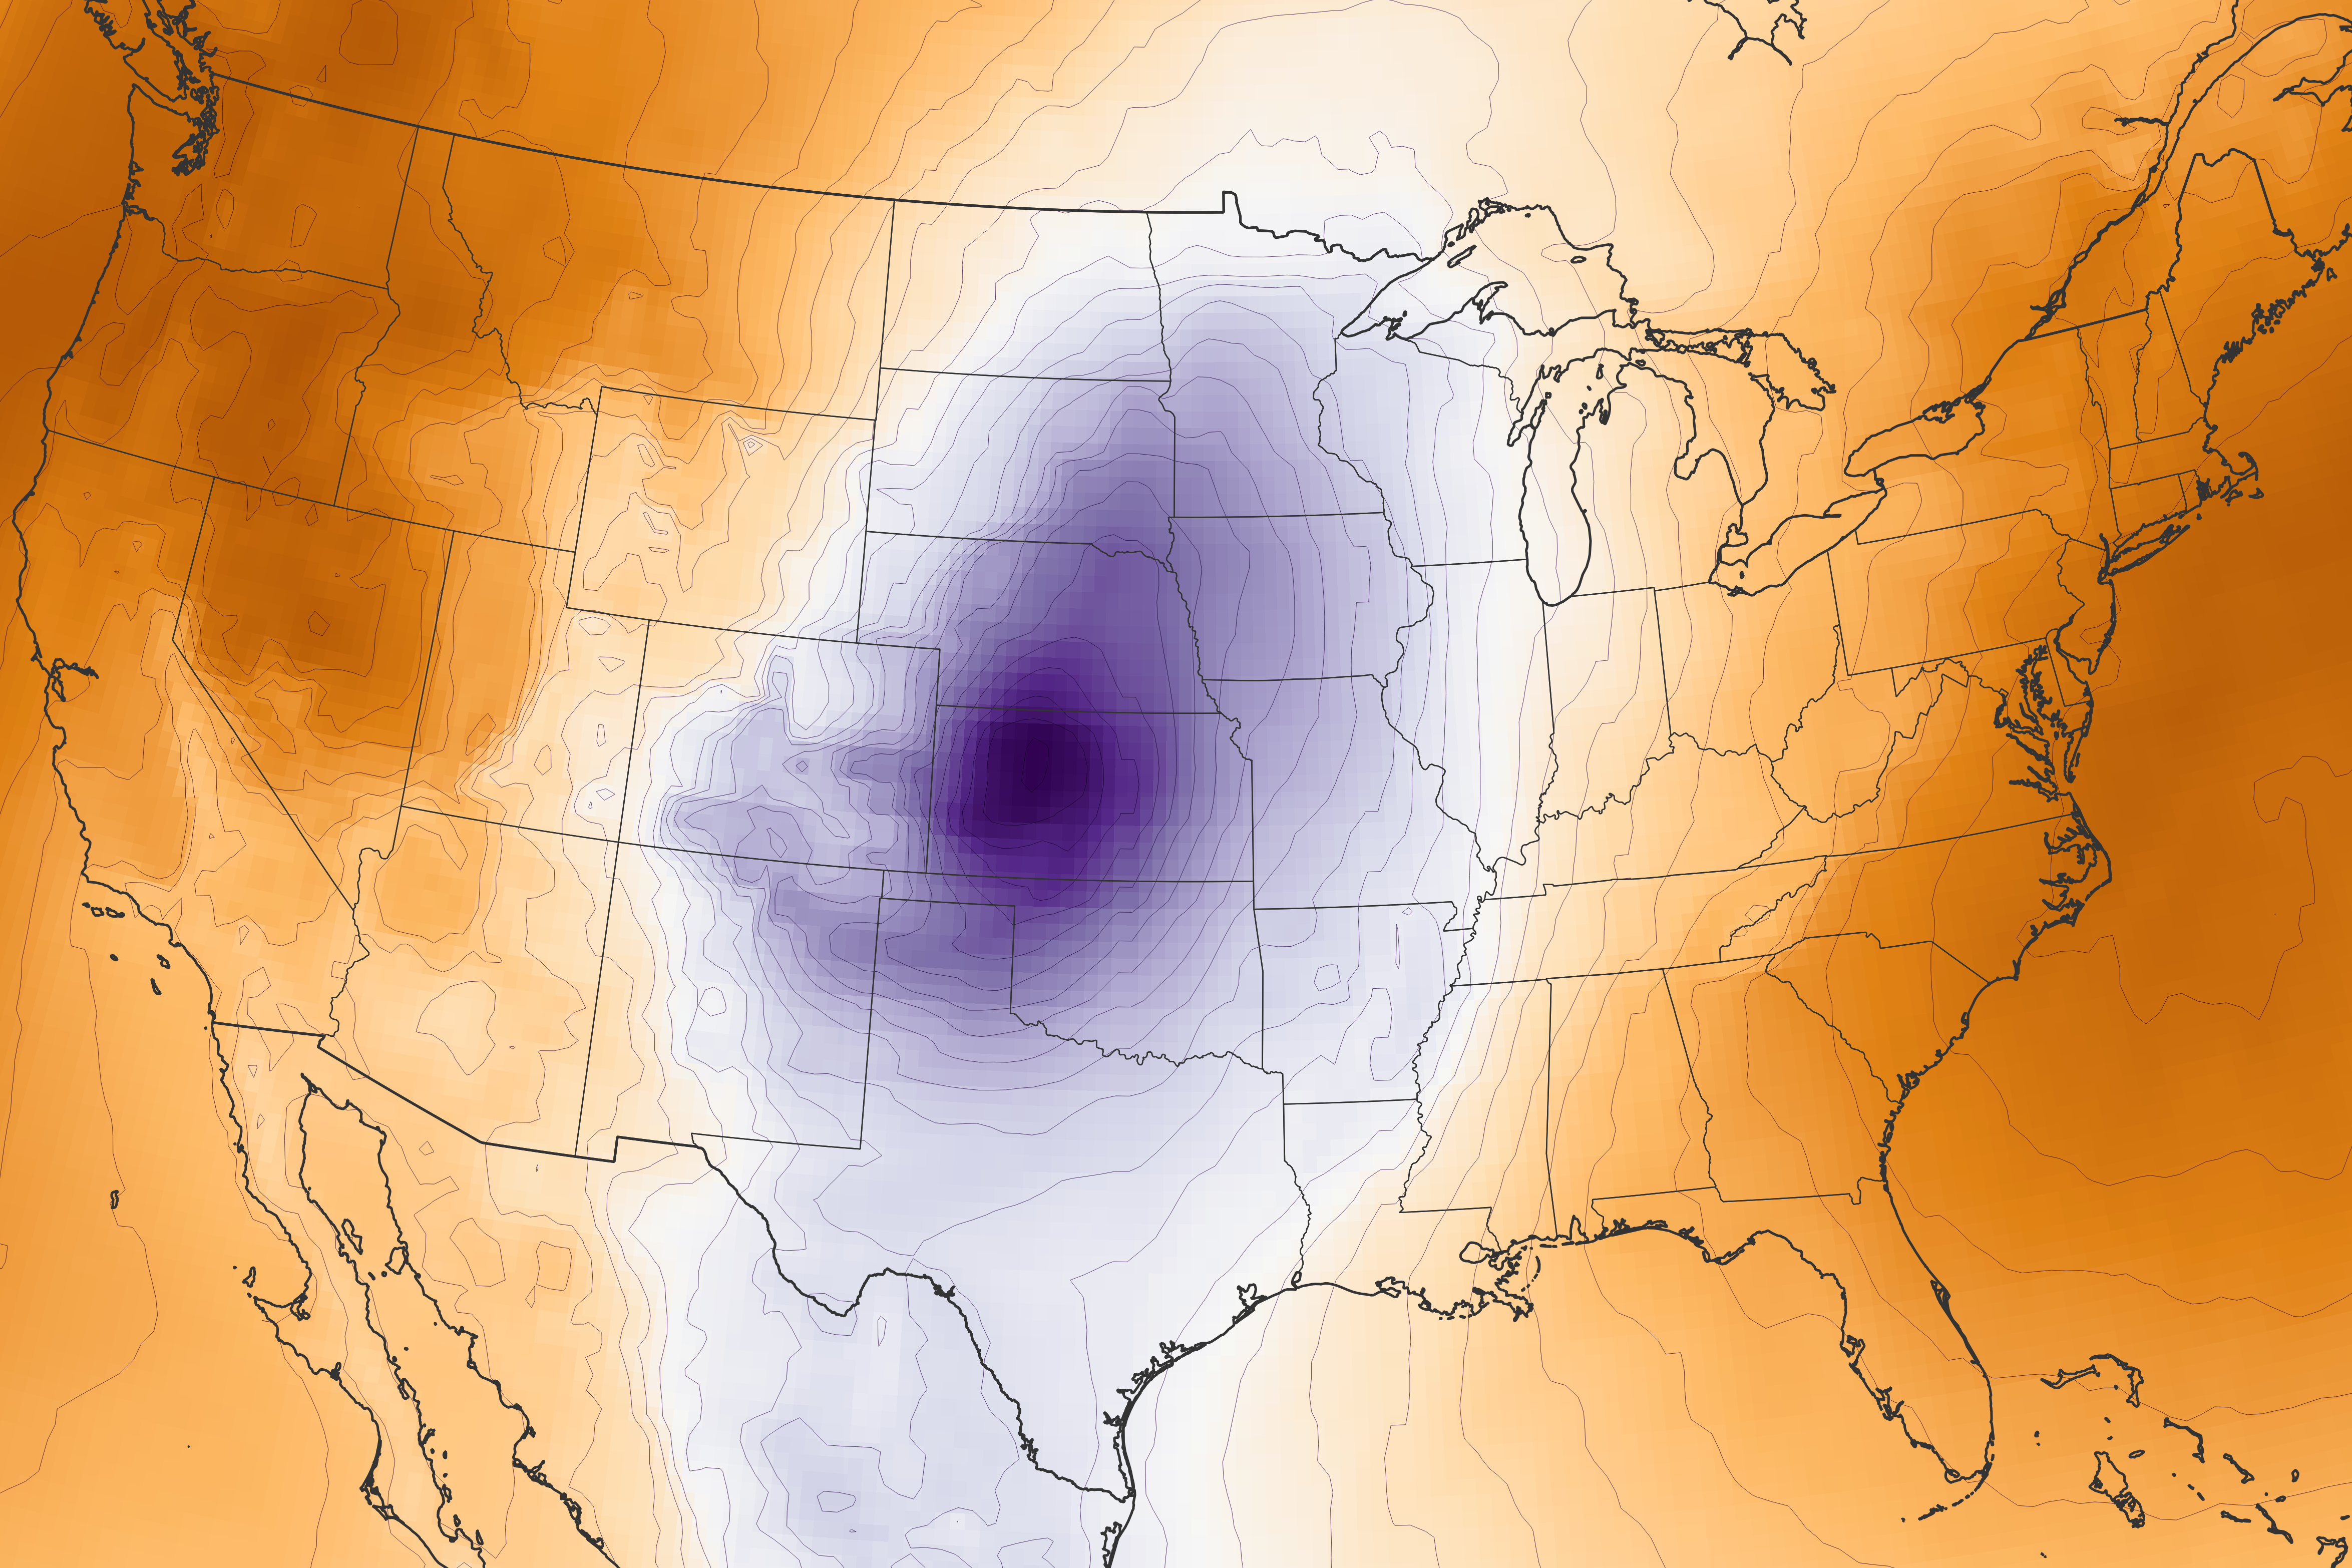 Late-Winter Storm Blasts the Great Plains - related image preview